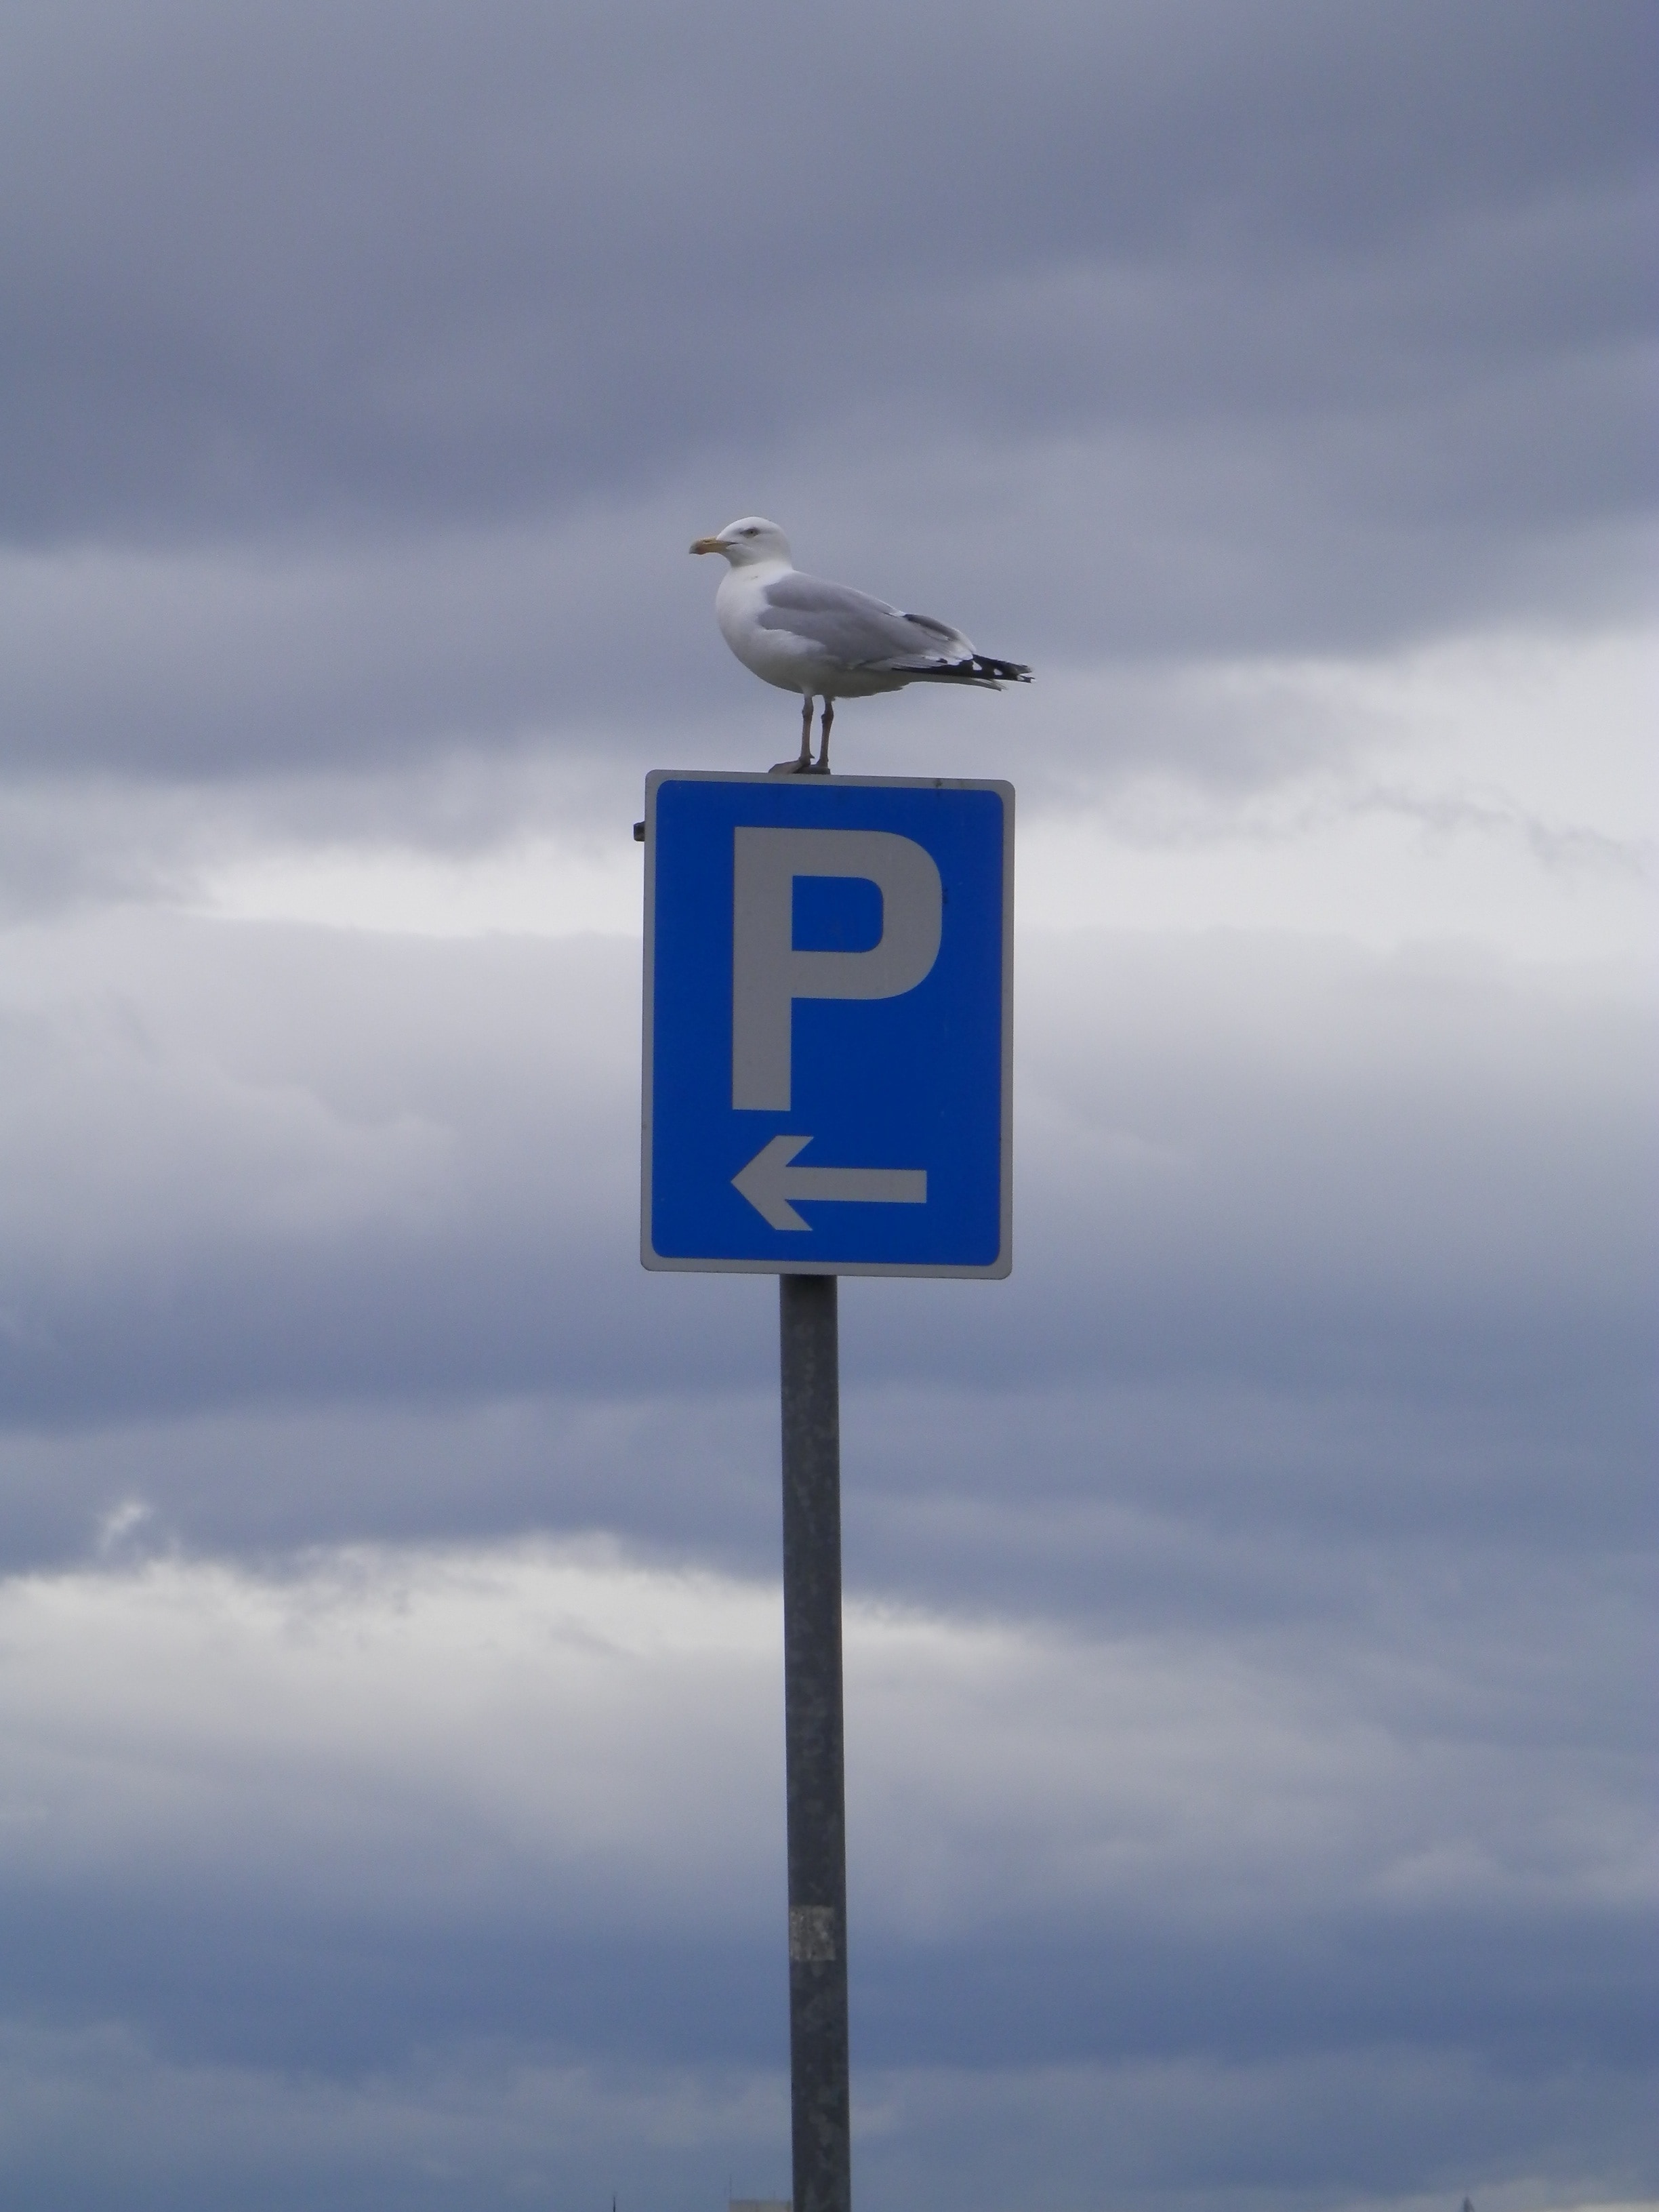 white and gray feathered bird on parking signage